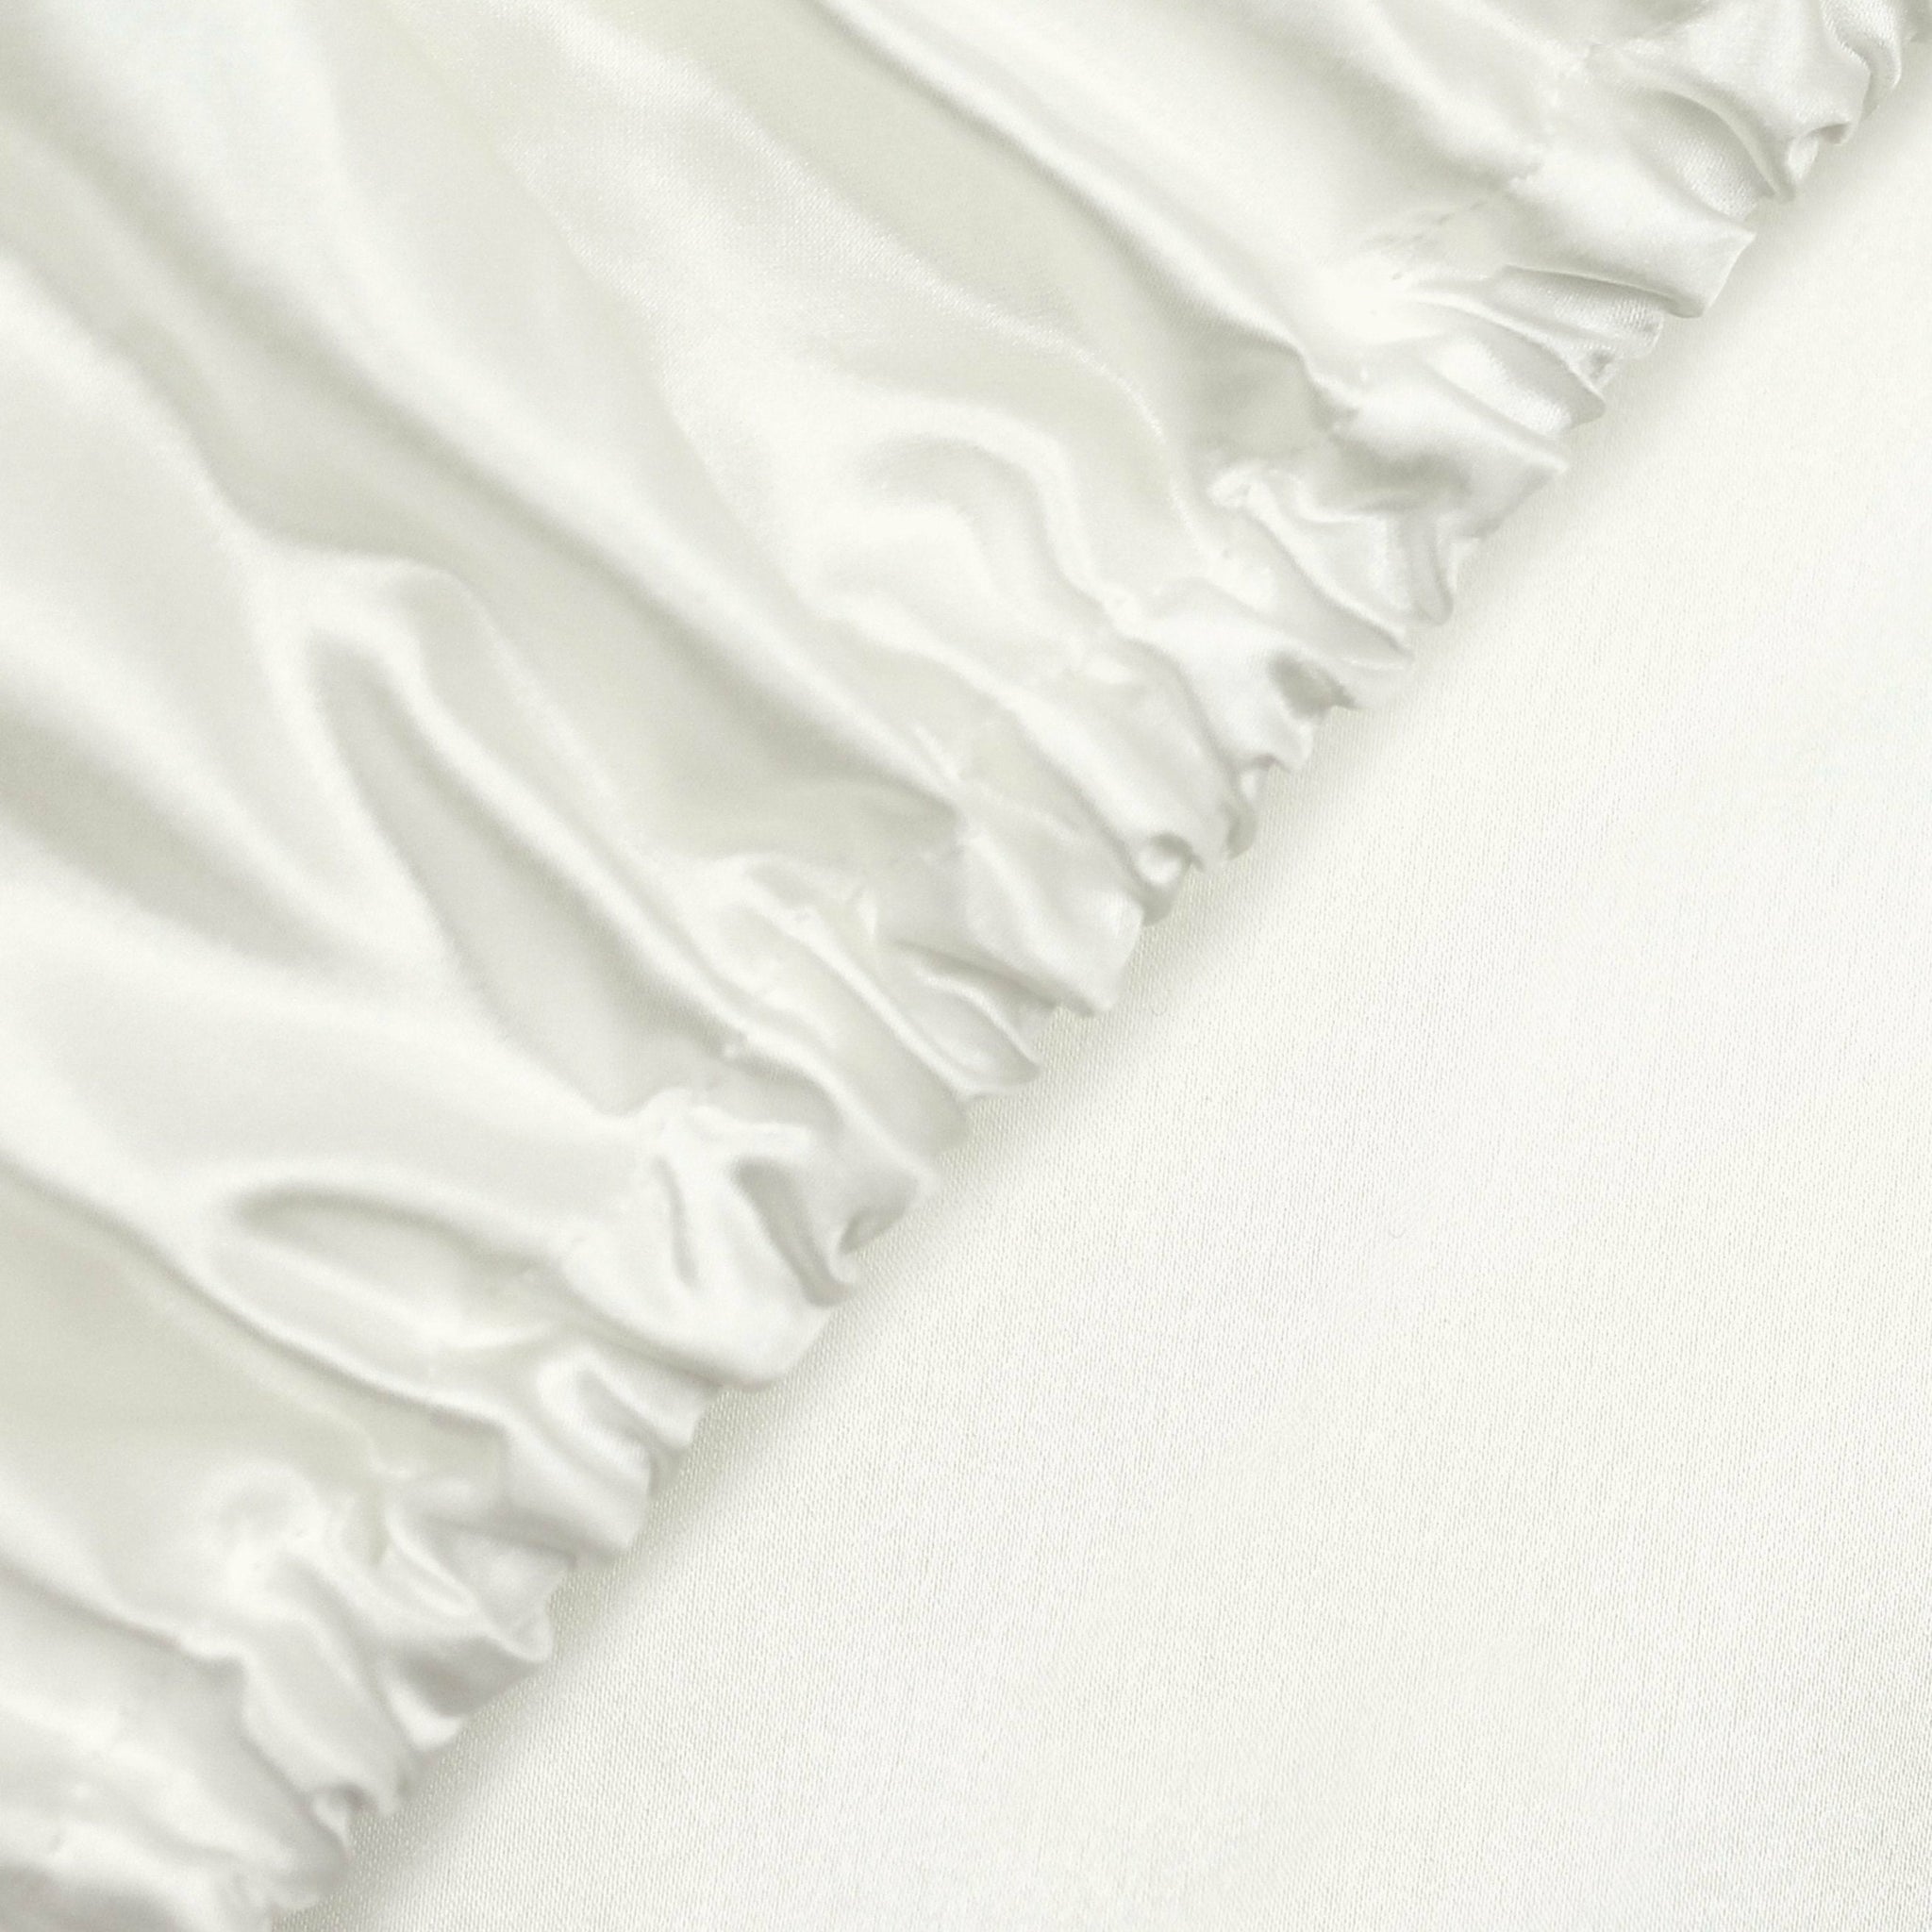 Mulberry silk fitted sheets from natural silk